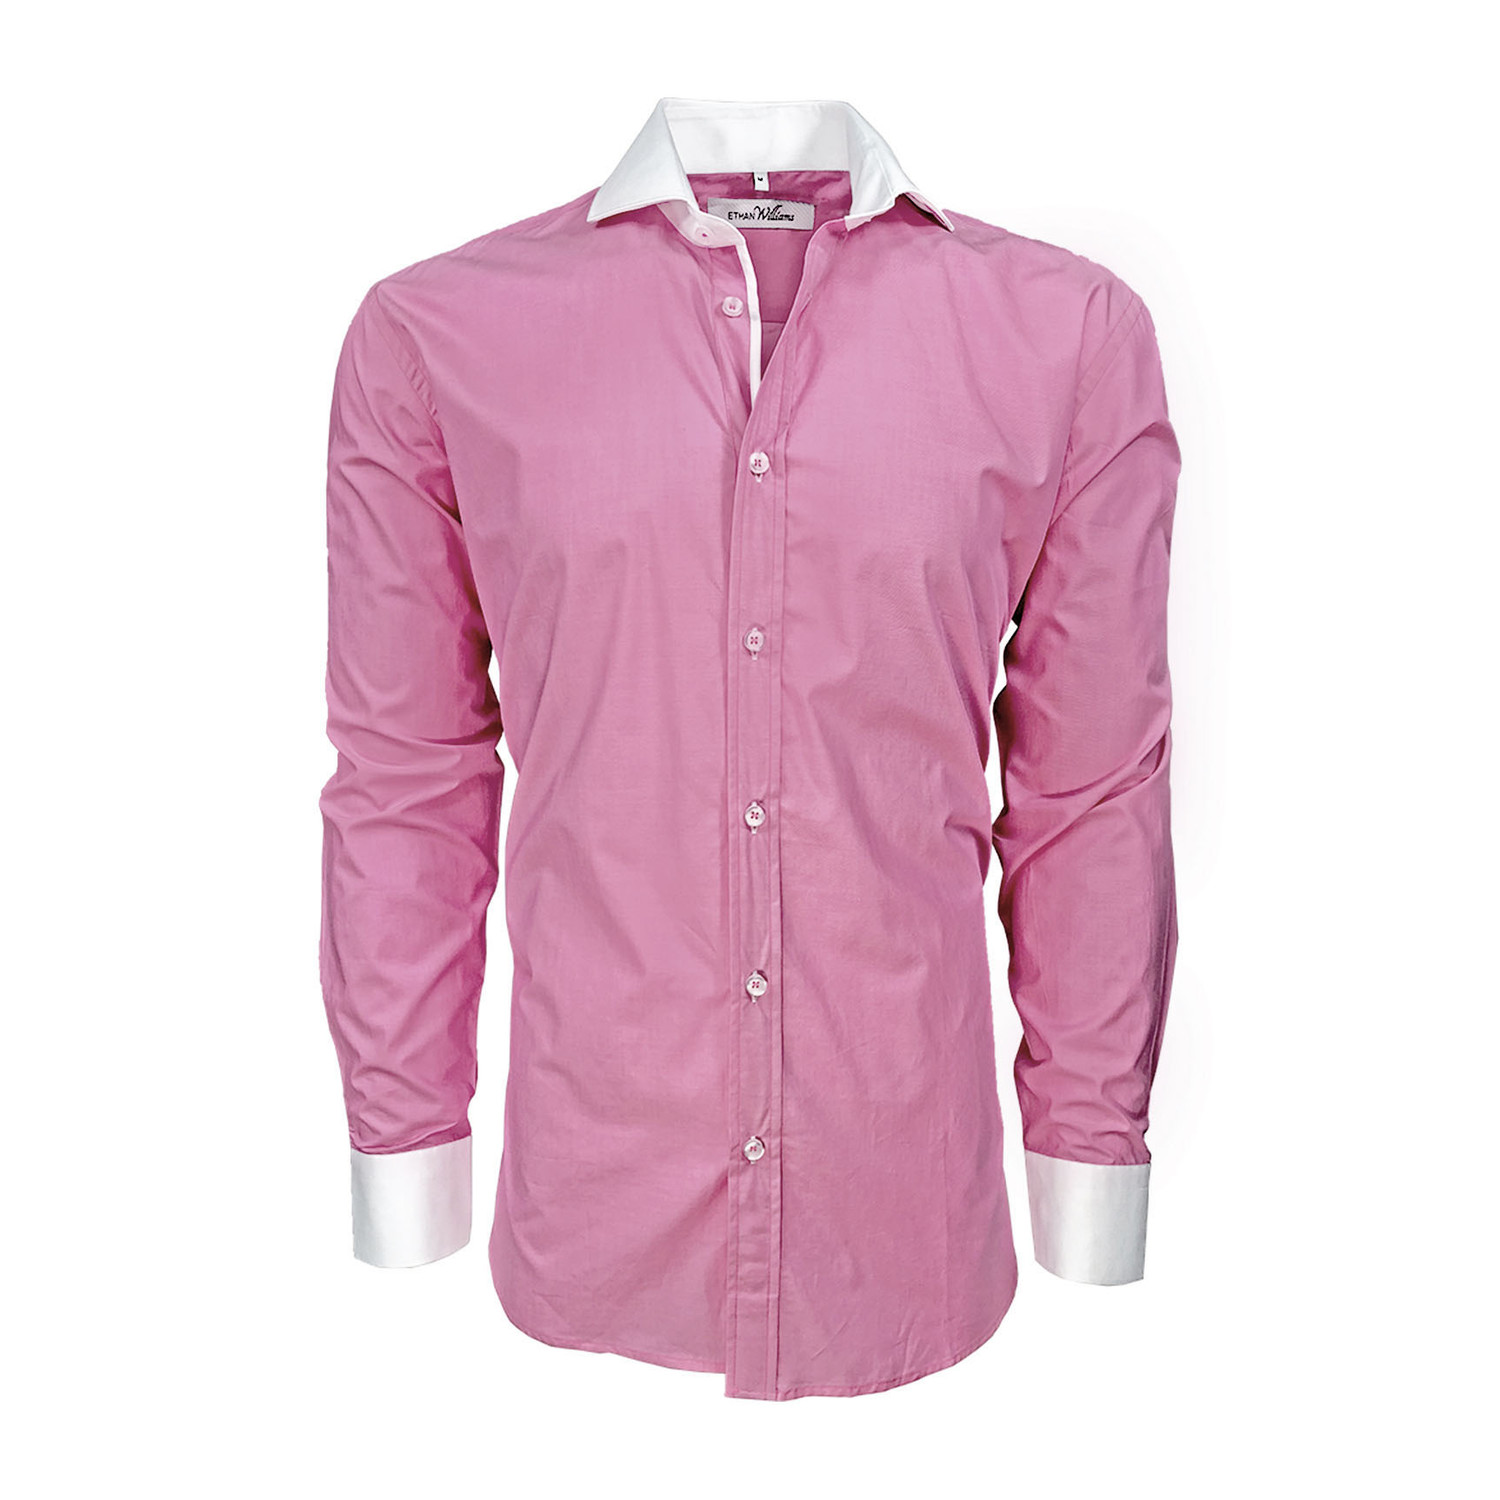 Semi Fitted Button Down Shirt // Light Blue + Pink Contrast Collar ...